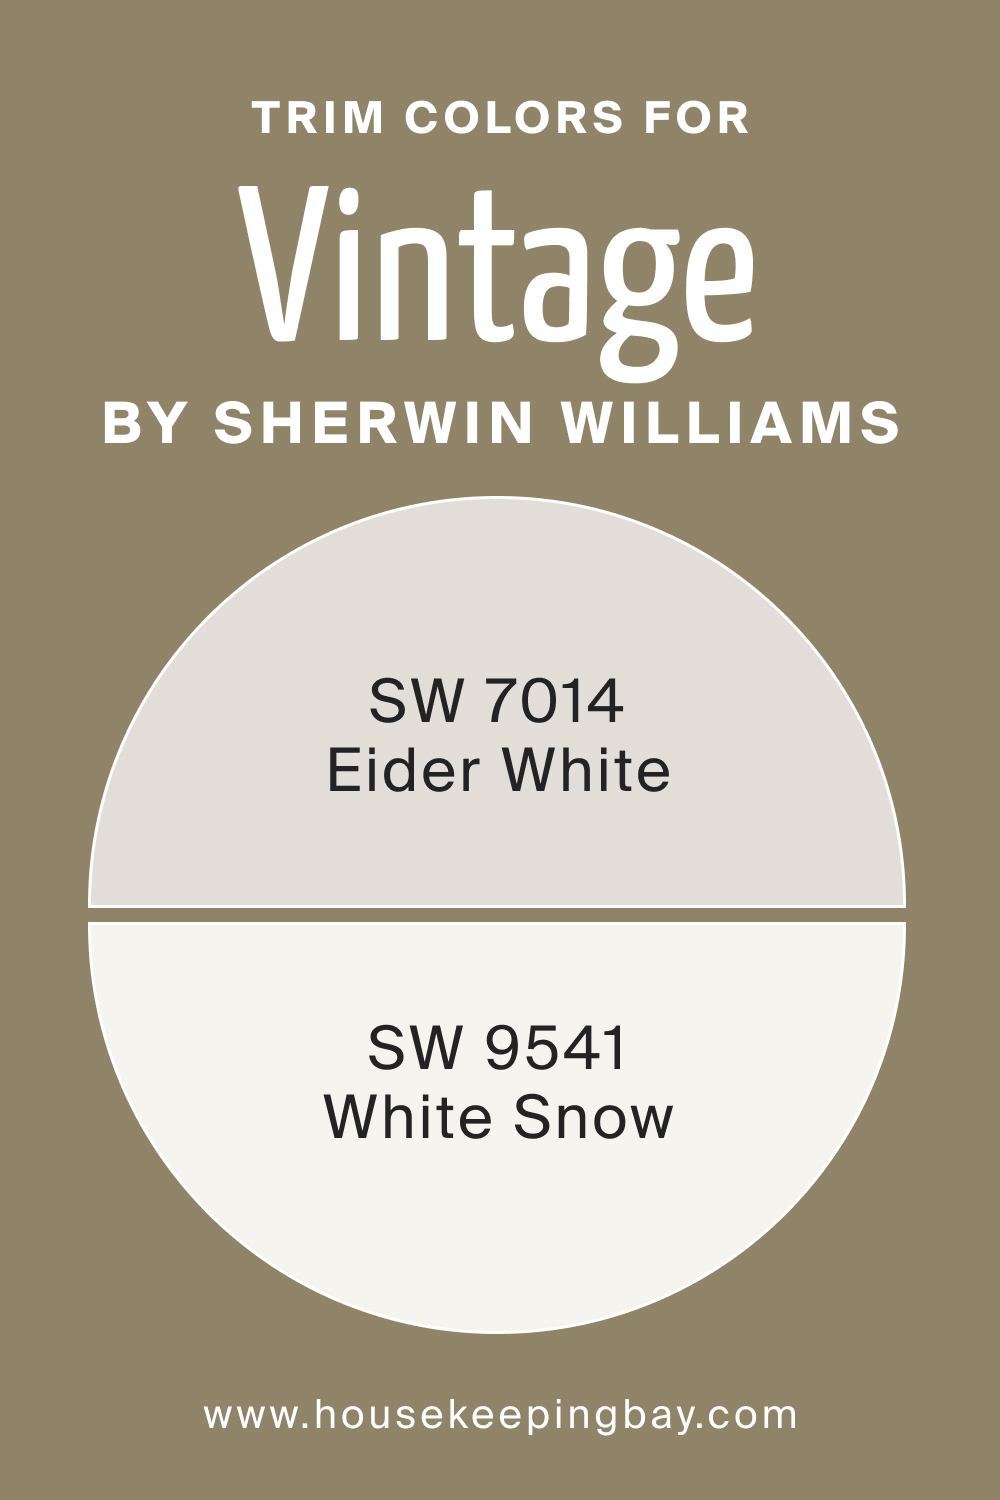 Trim Colors of SW 9528 Vintage by Sherwin Williams